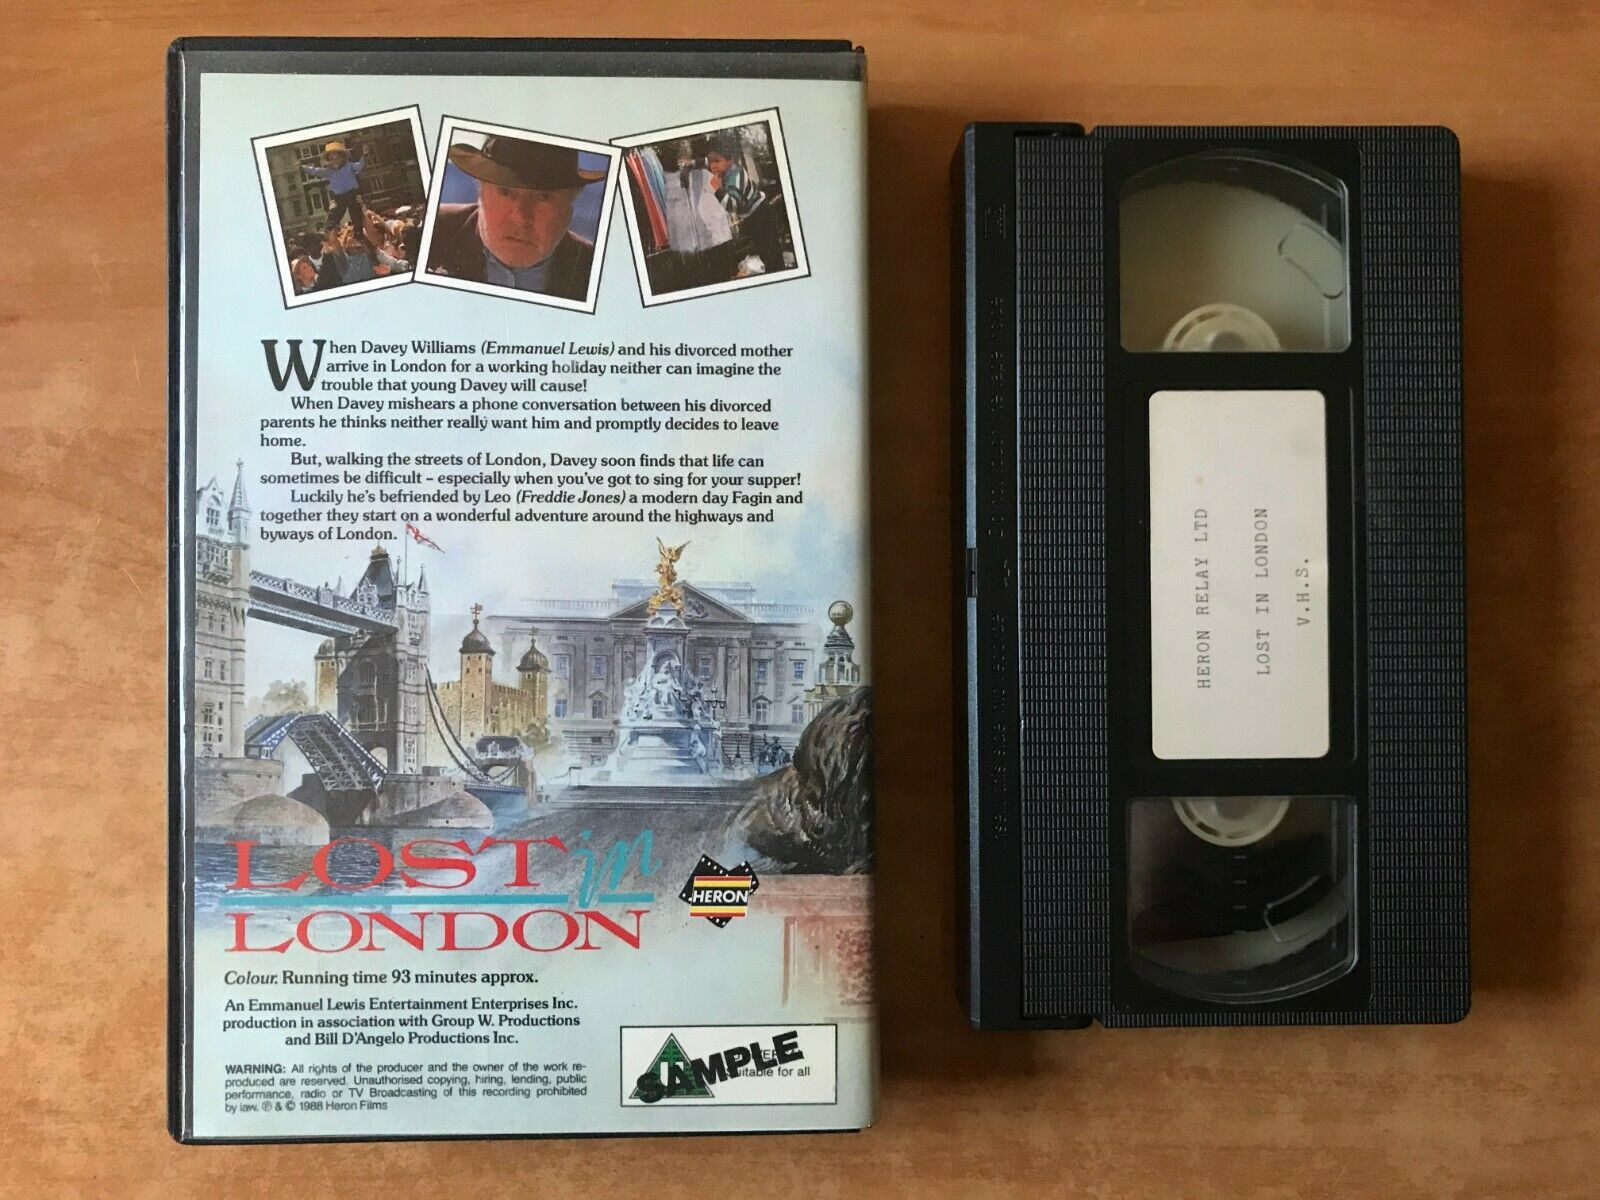 Lost In London [Sample Tape]: (1985) Made For TV - Drama - Large Box - Pal VHS-